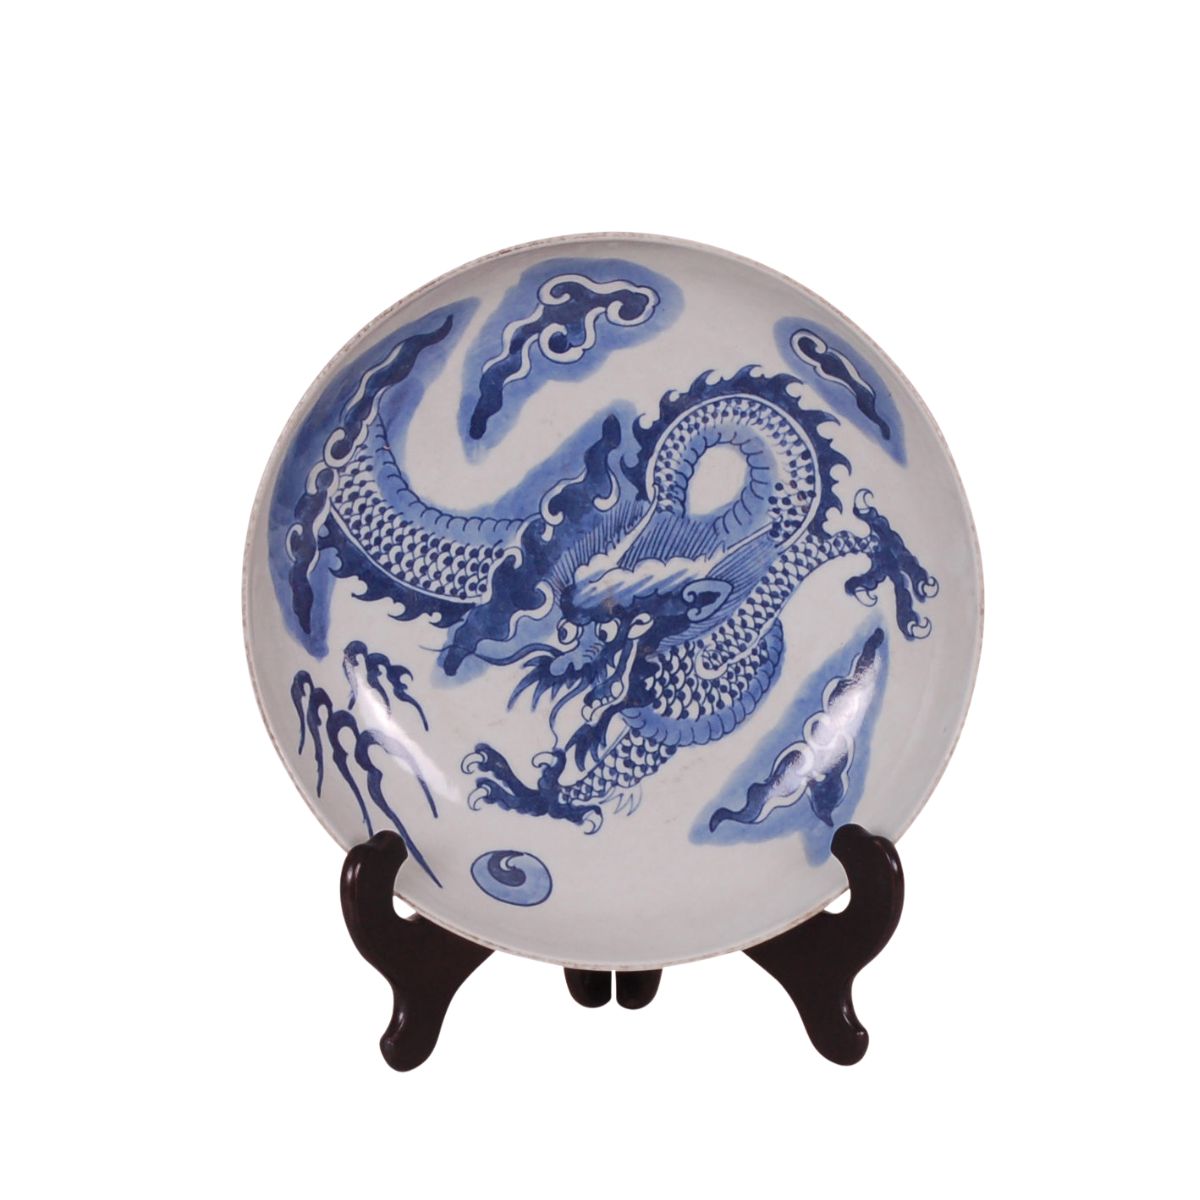 Blue and White Chinese Porcelain Plate, Dragon Design